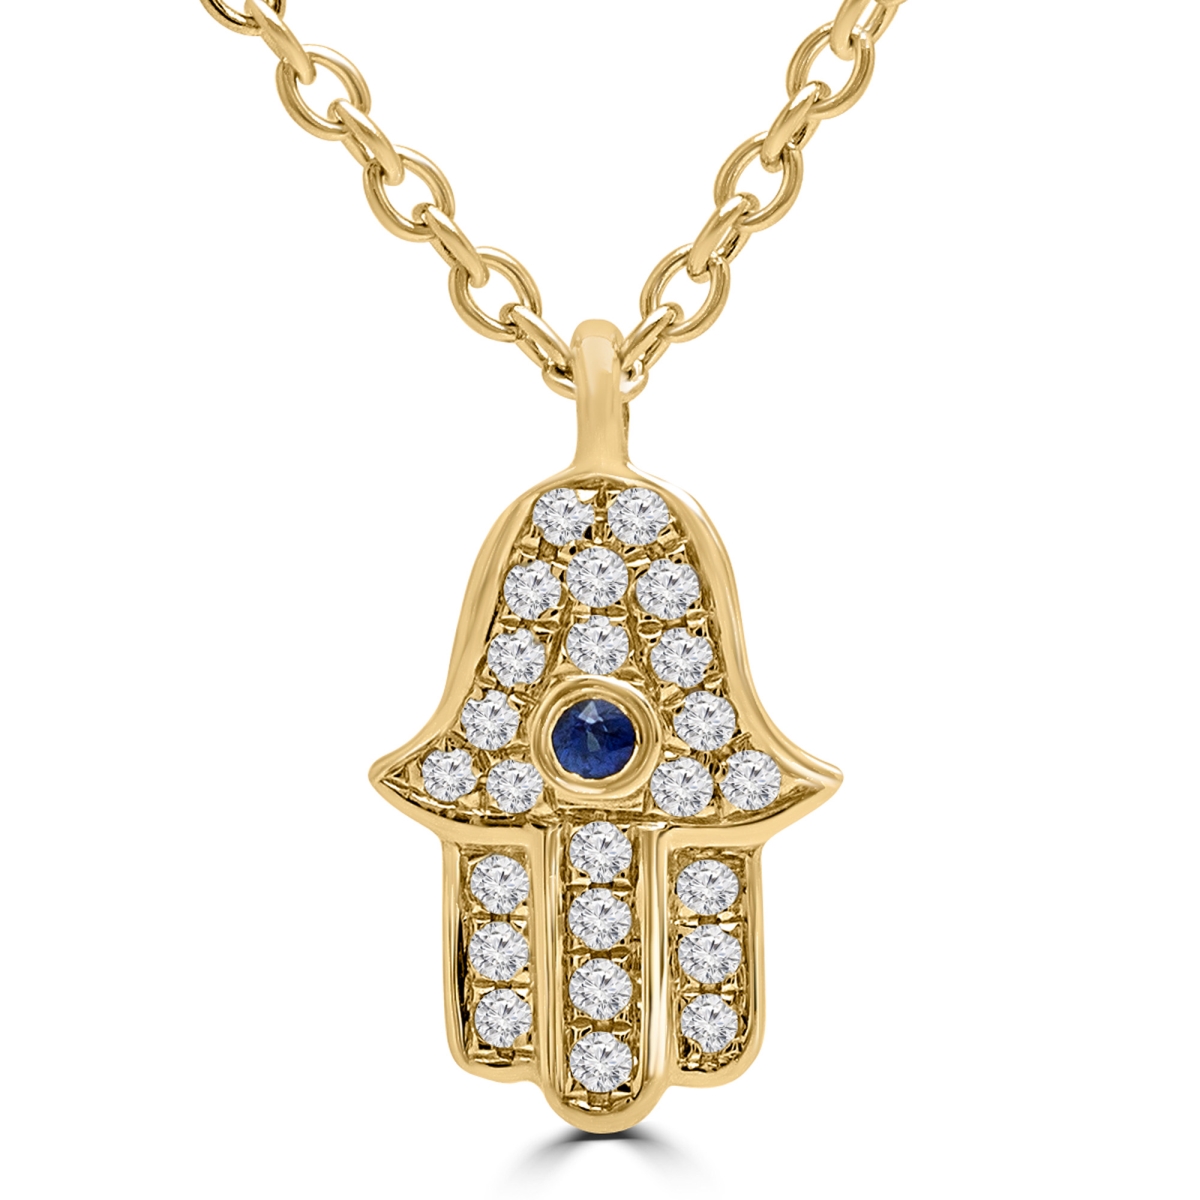 Md190335 0.1 Ctw Round Blue Sapphire Hamsa Fancy Pendant Necklace In 14k Yellow Gold